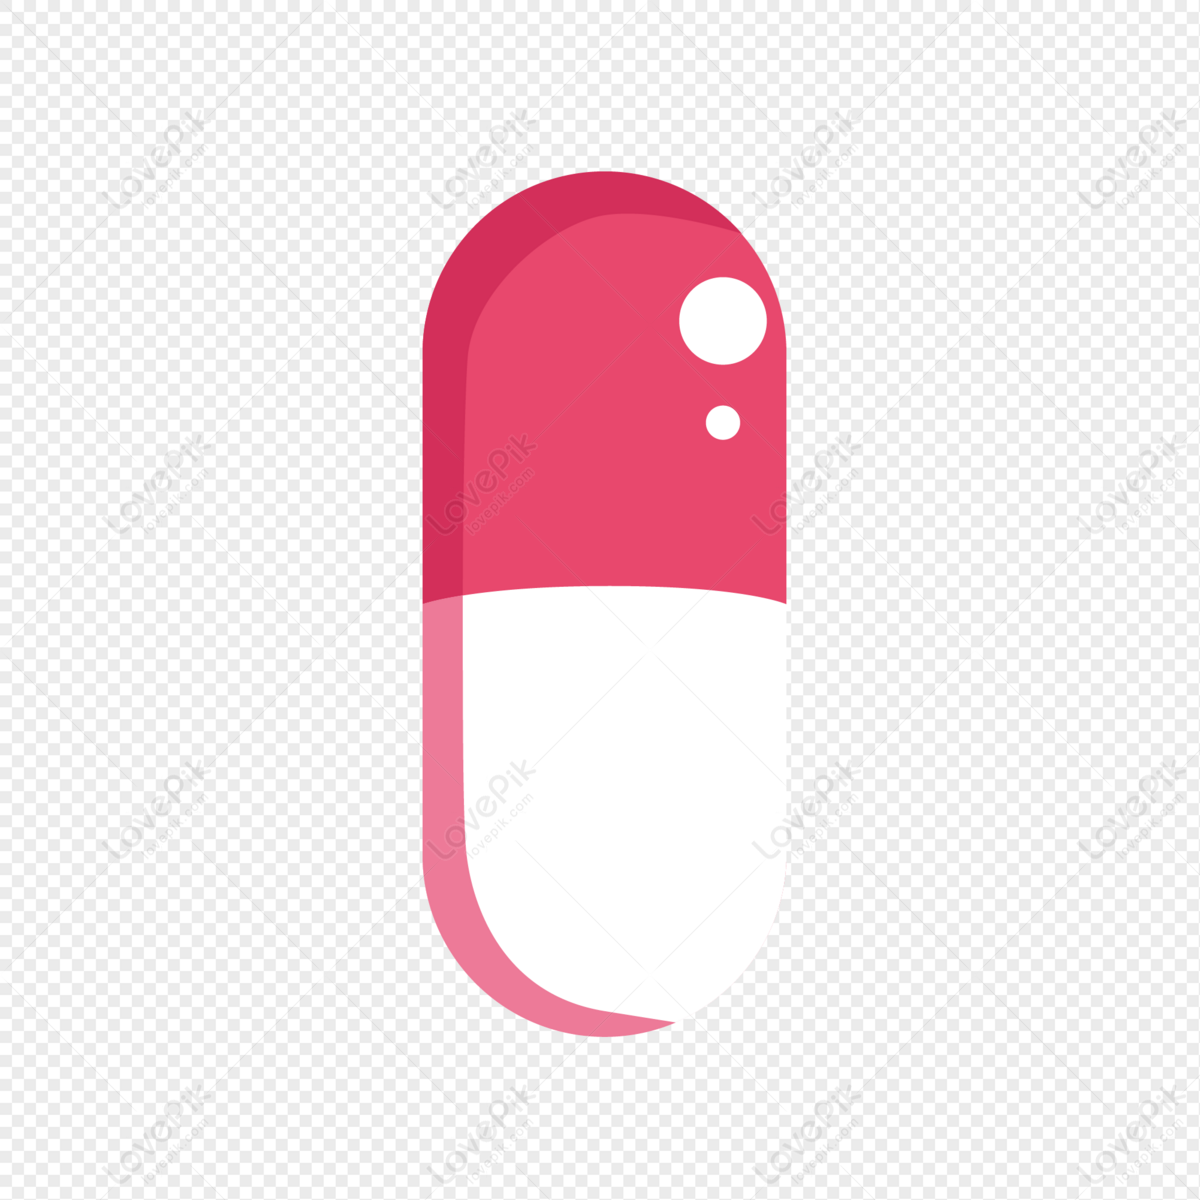 Capsule PNGs for Free Download